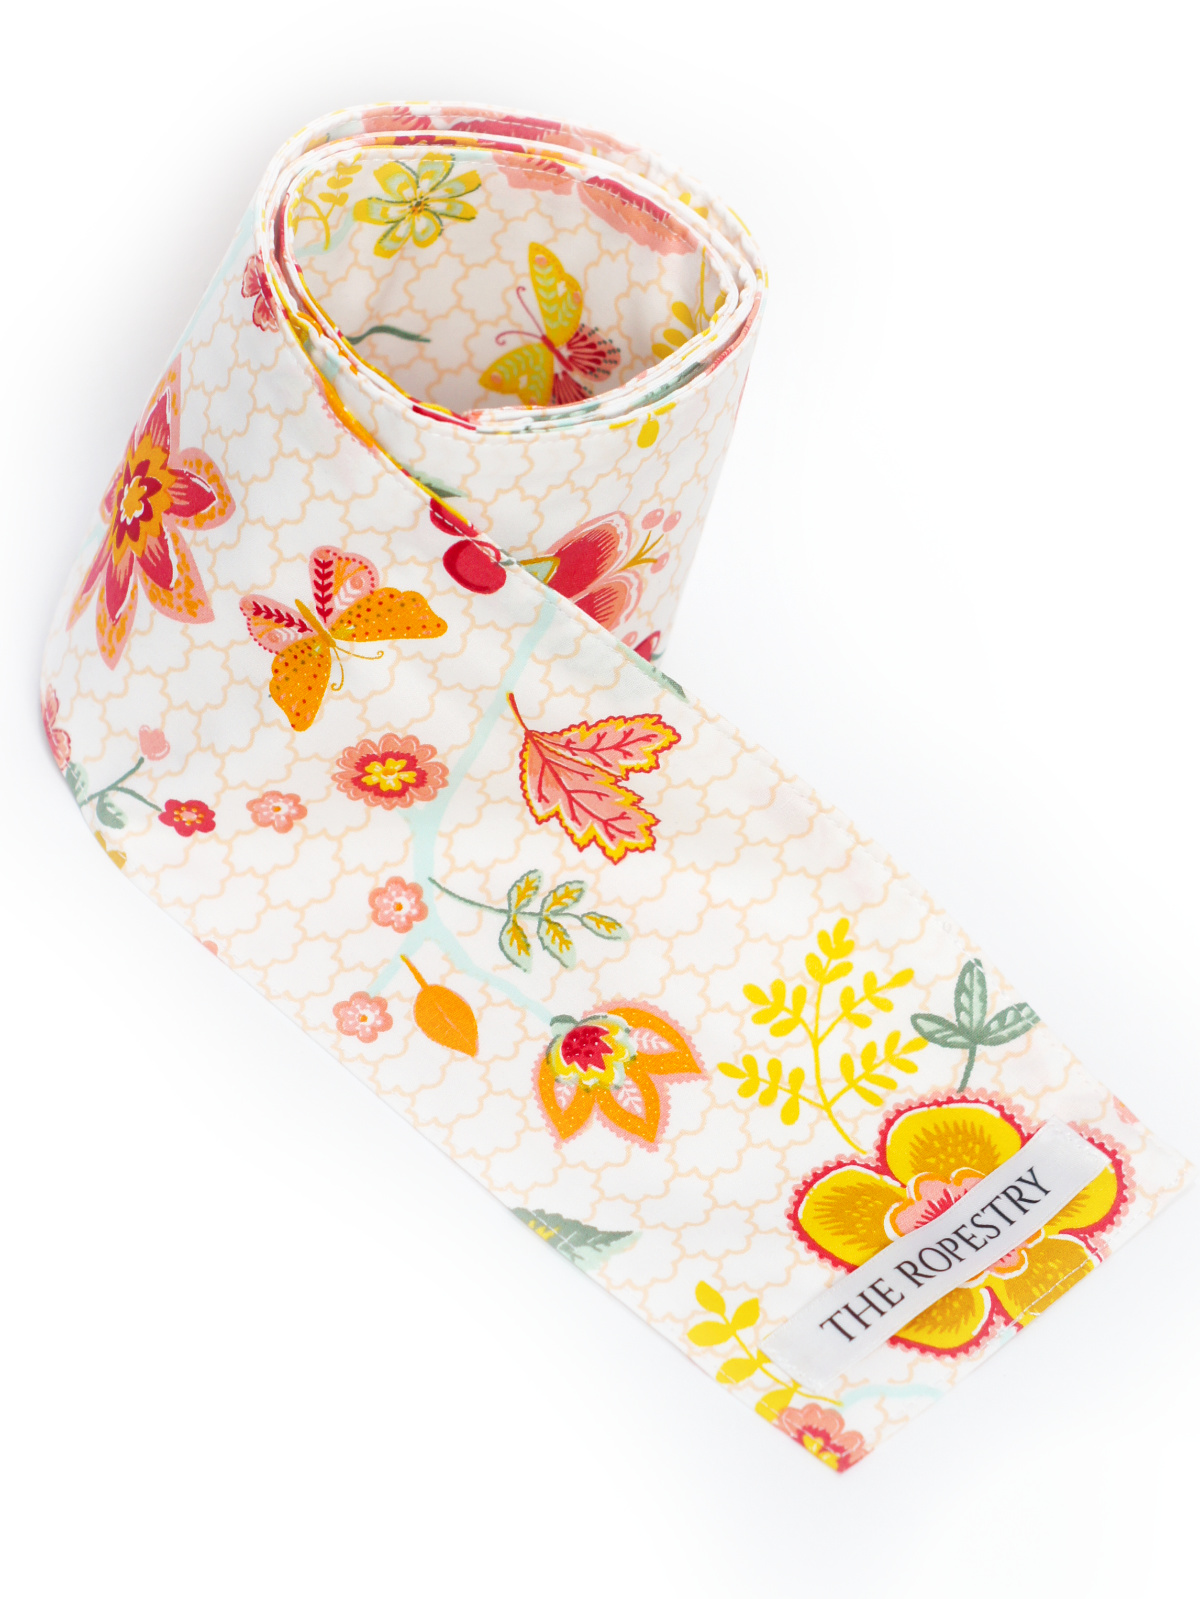 Blindfold "Flowers & Birds", 4-ply, 100% cotton